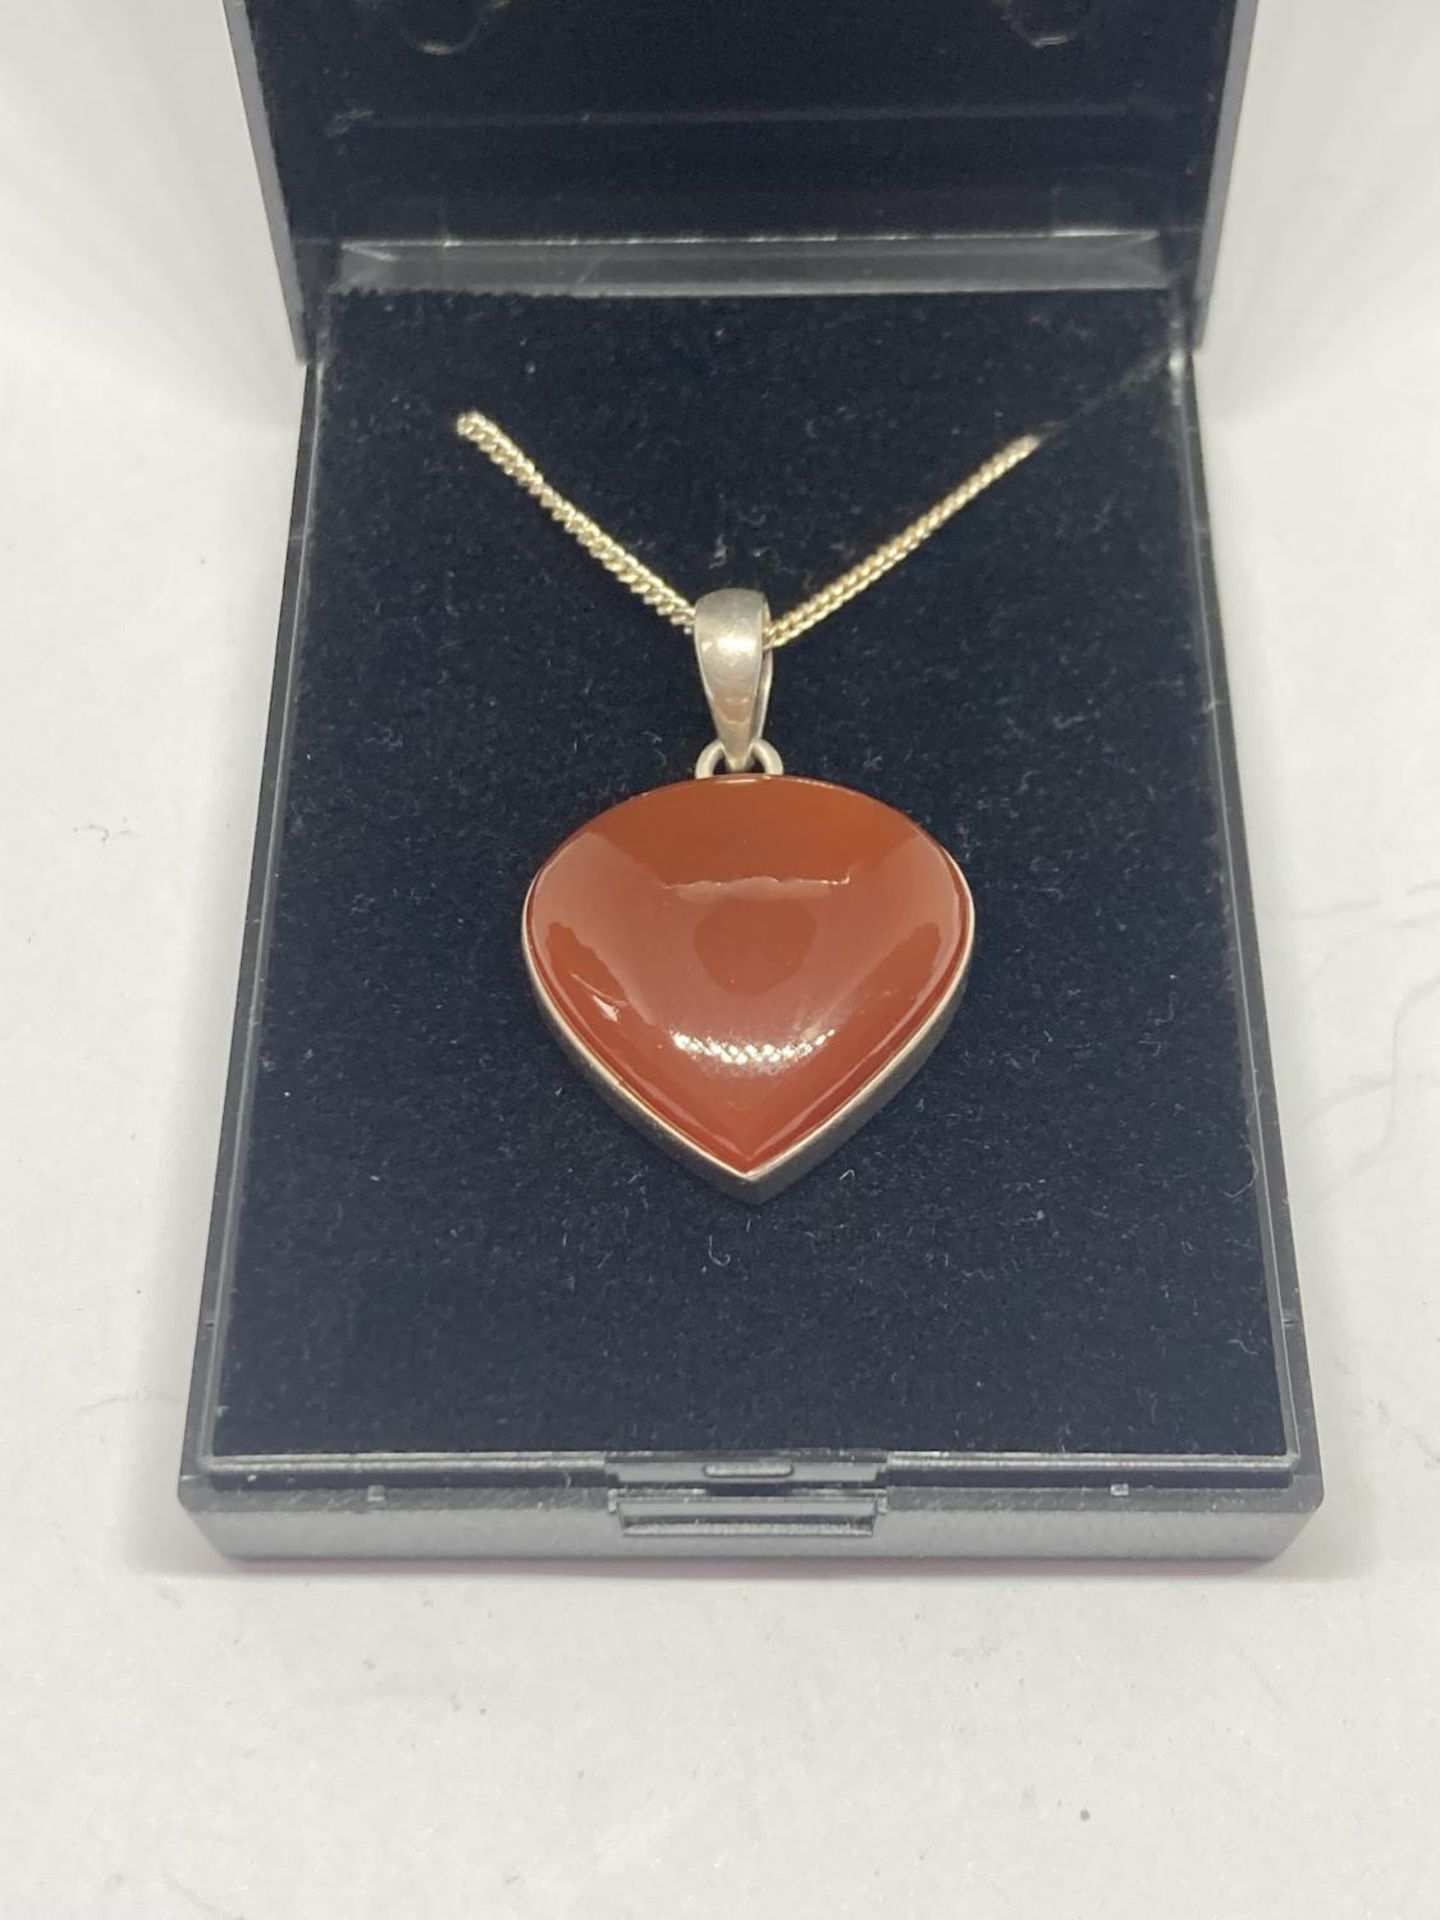 A SILVER AND AGATE NECKLACE IN A PRESENTATION BOX